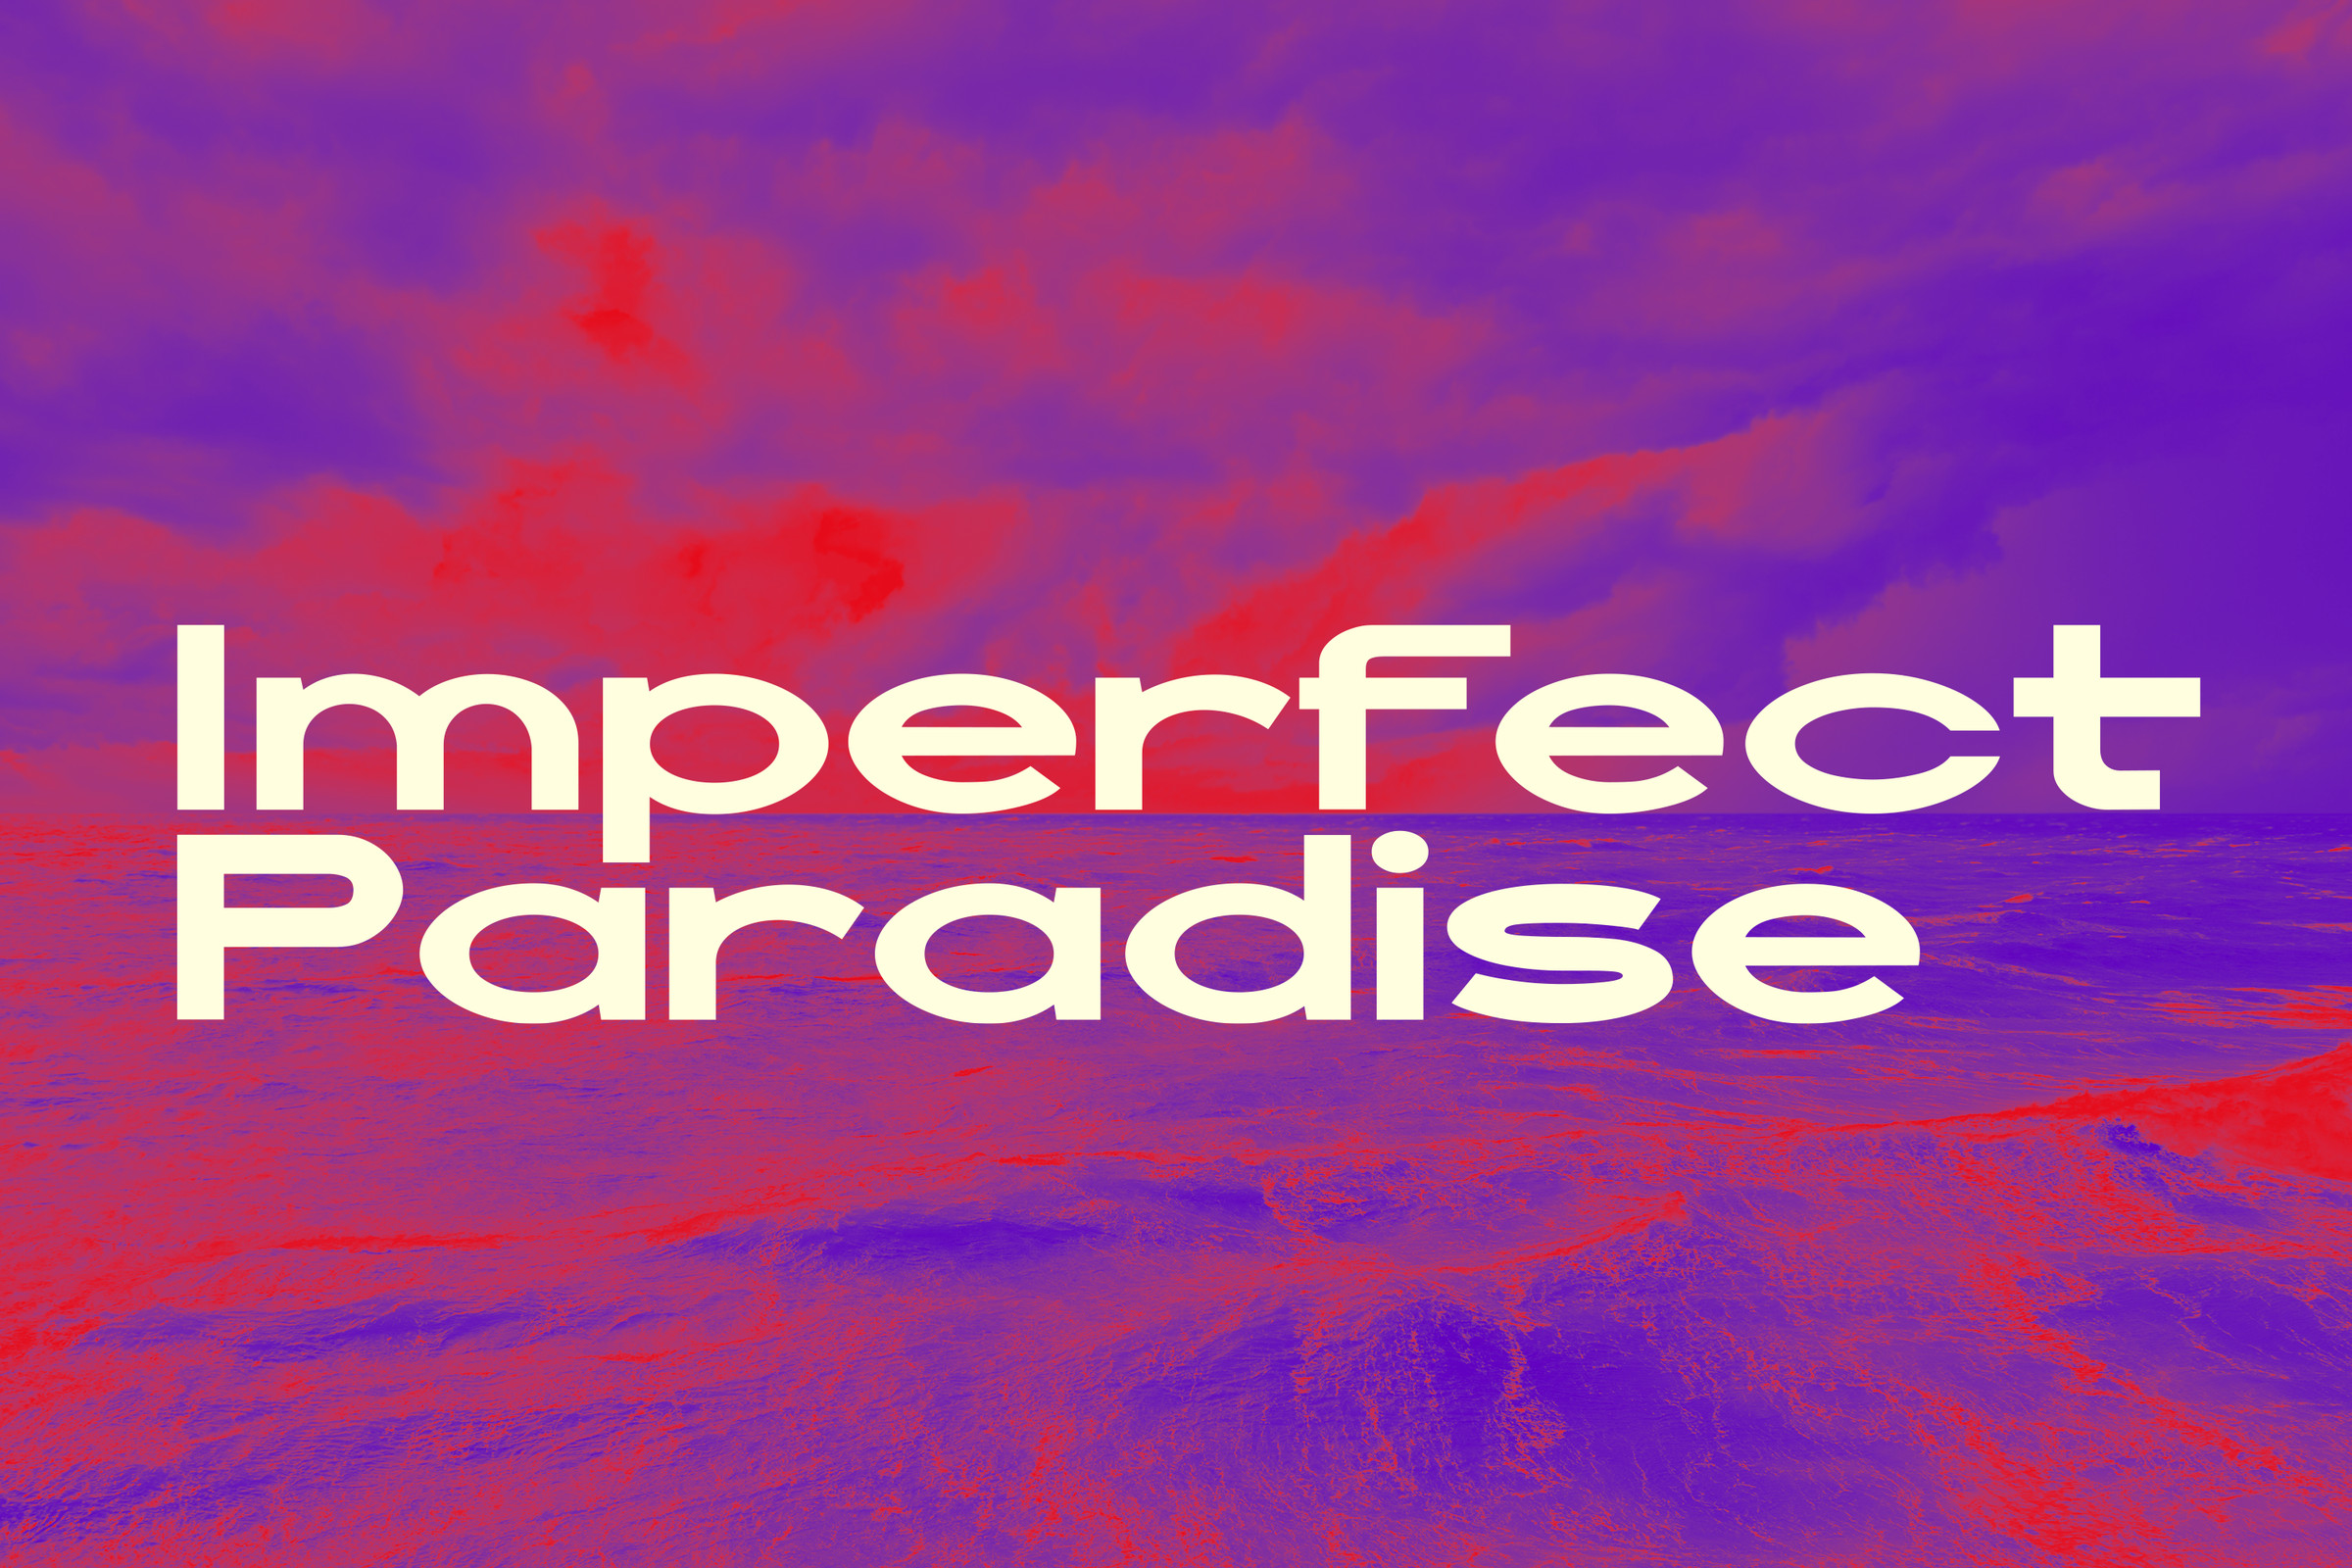 The name Imperfect Paradise on a red and purple background that appears to be a heavily stylized photo of clouds above ocean waves.